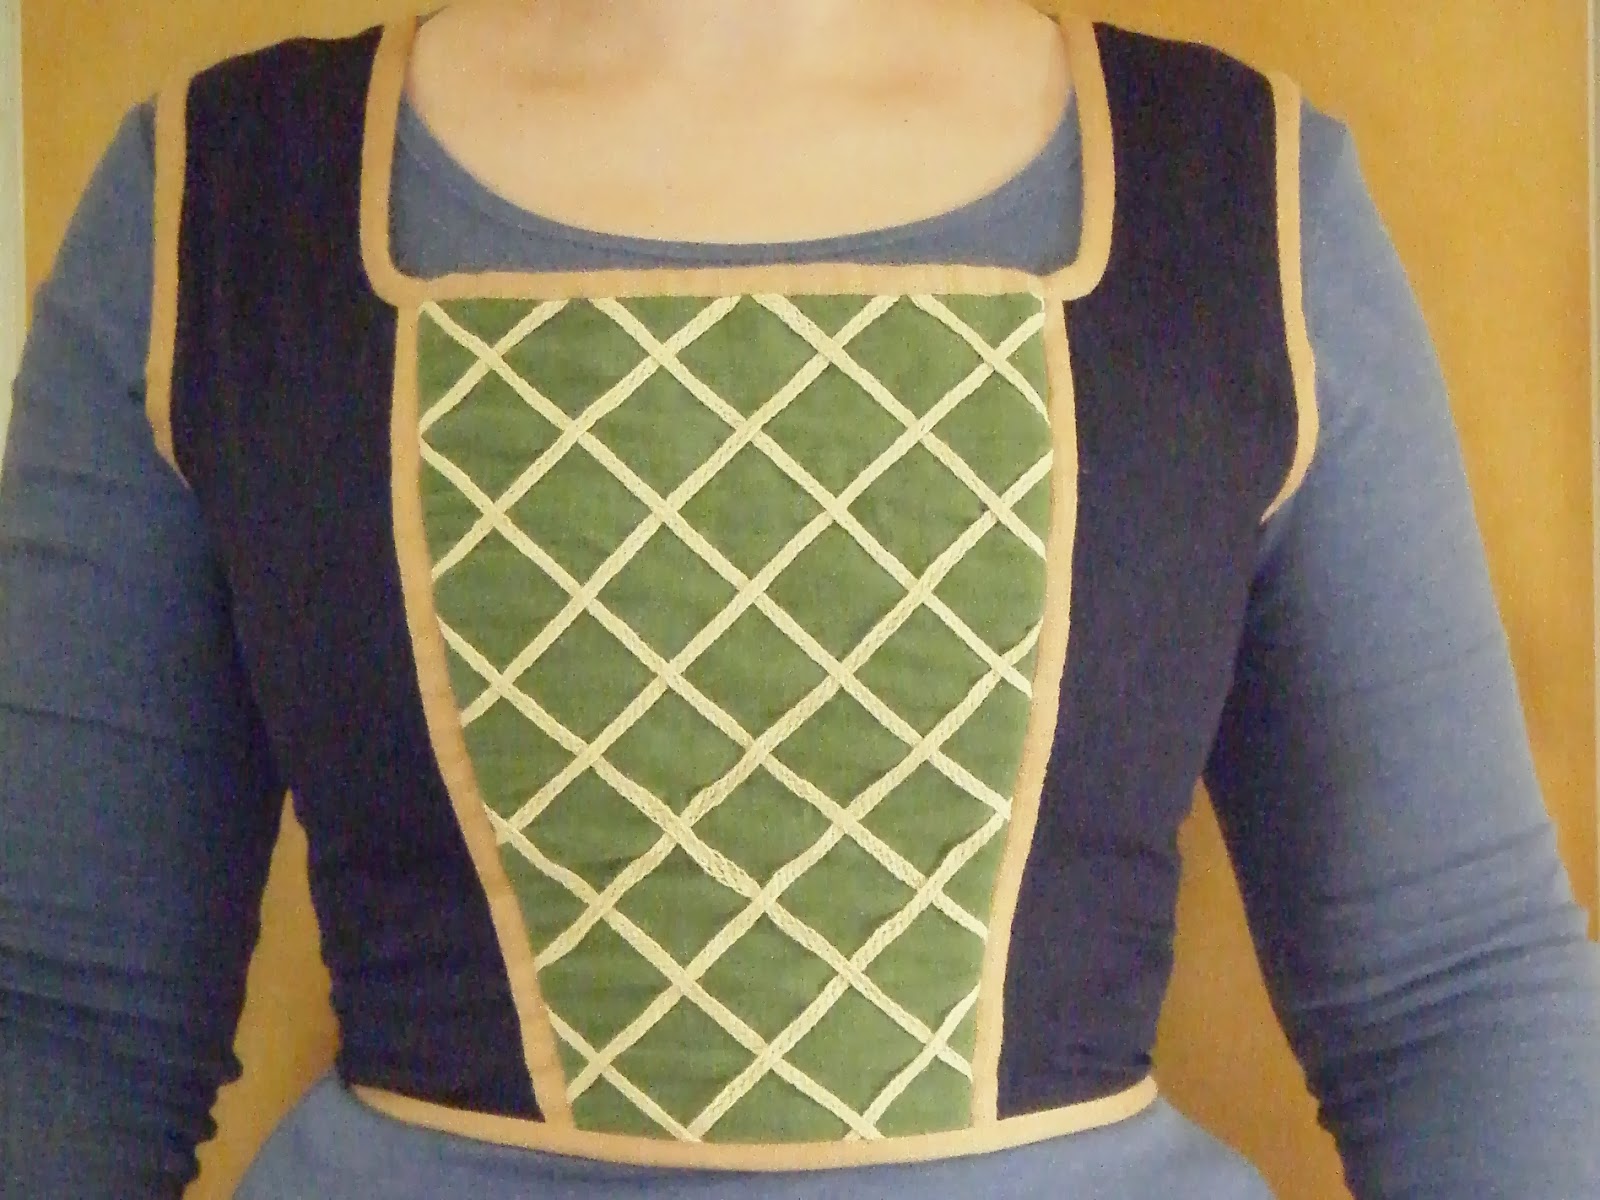 Hobbit Outfit – Part Two: The Bodice